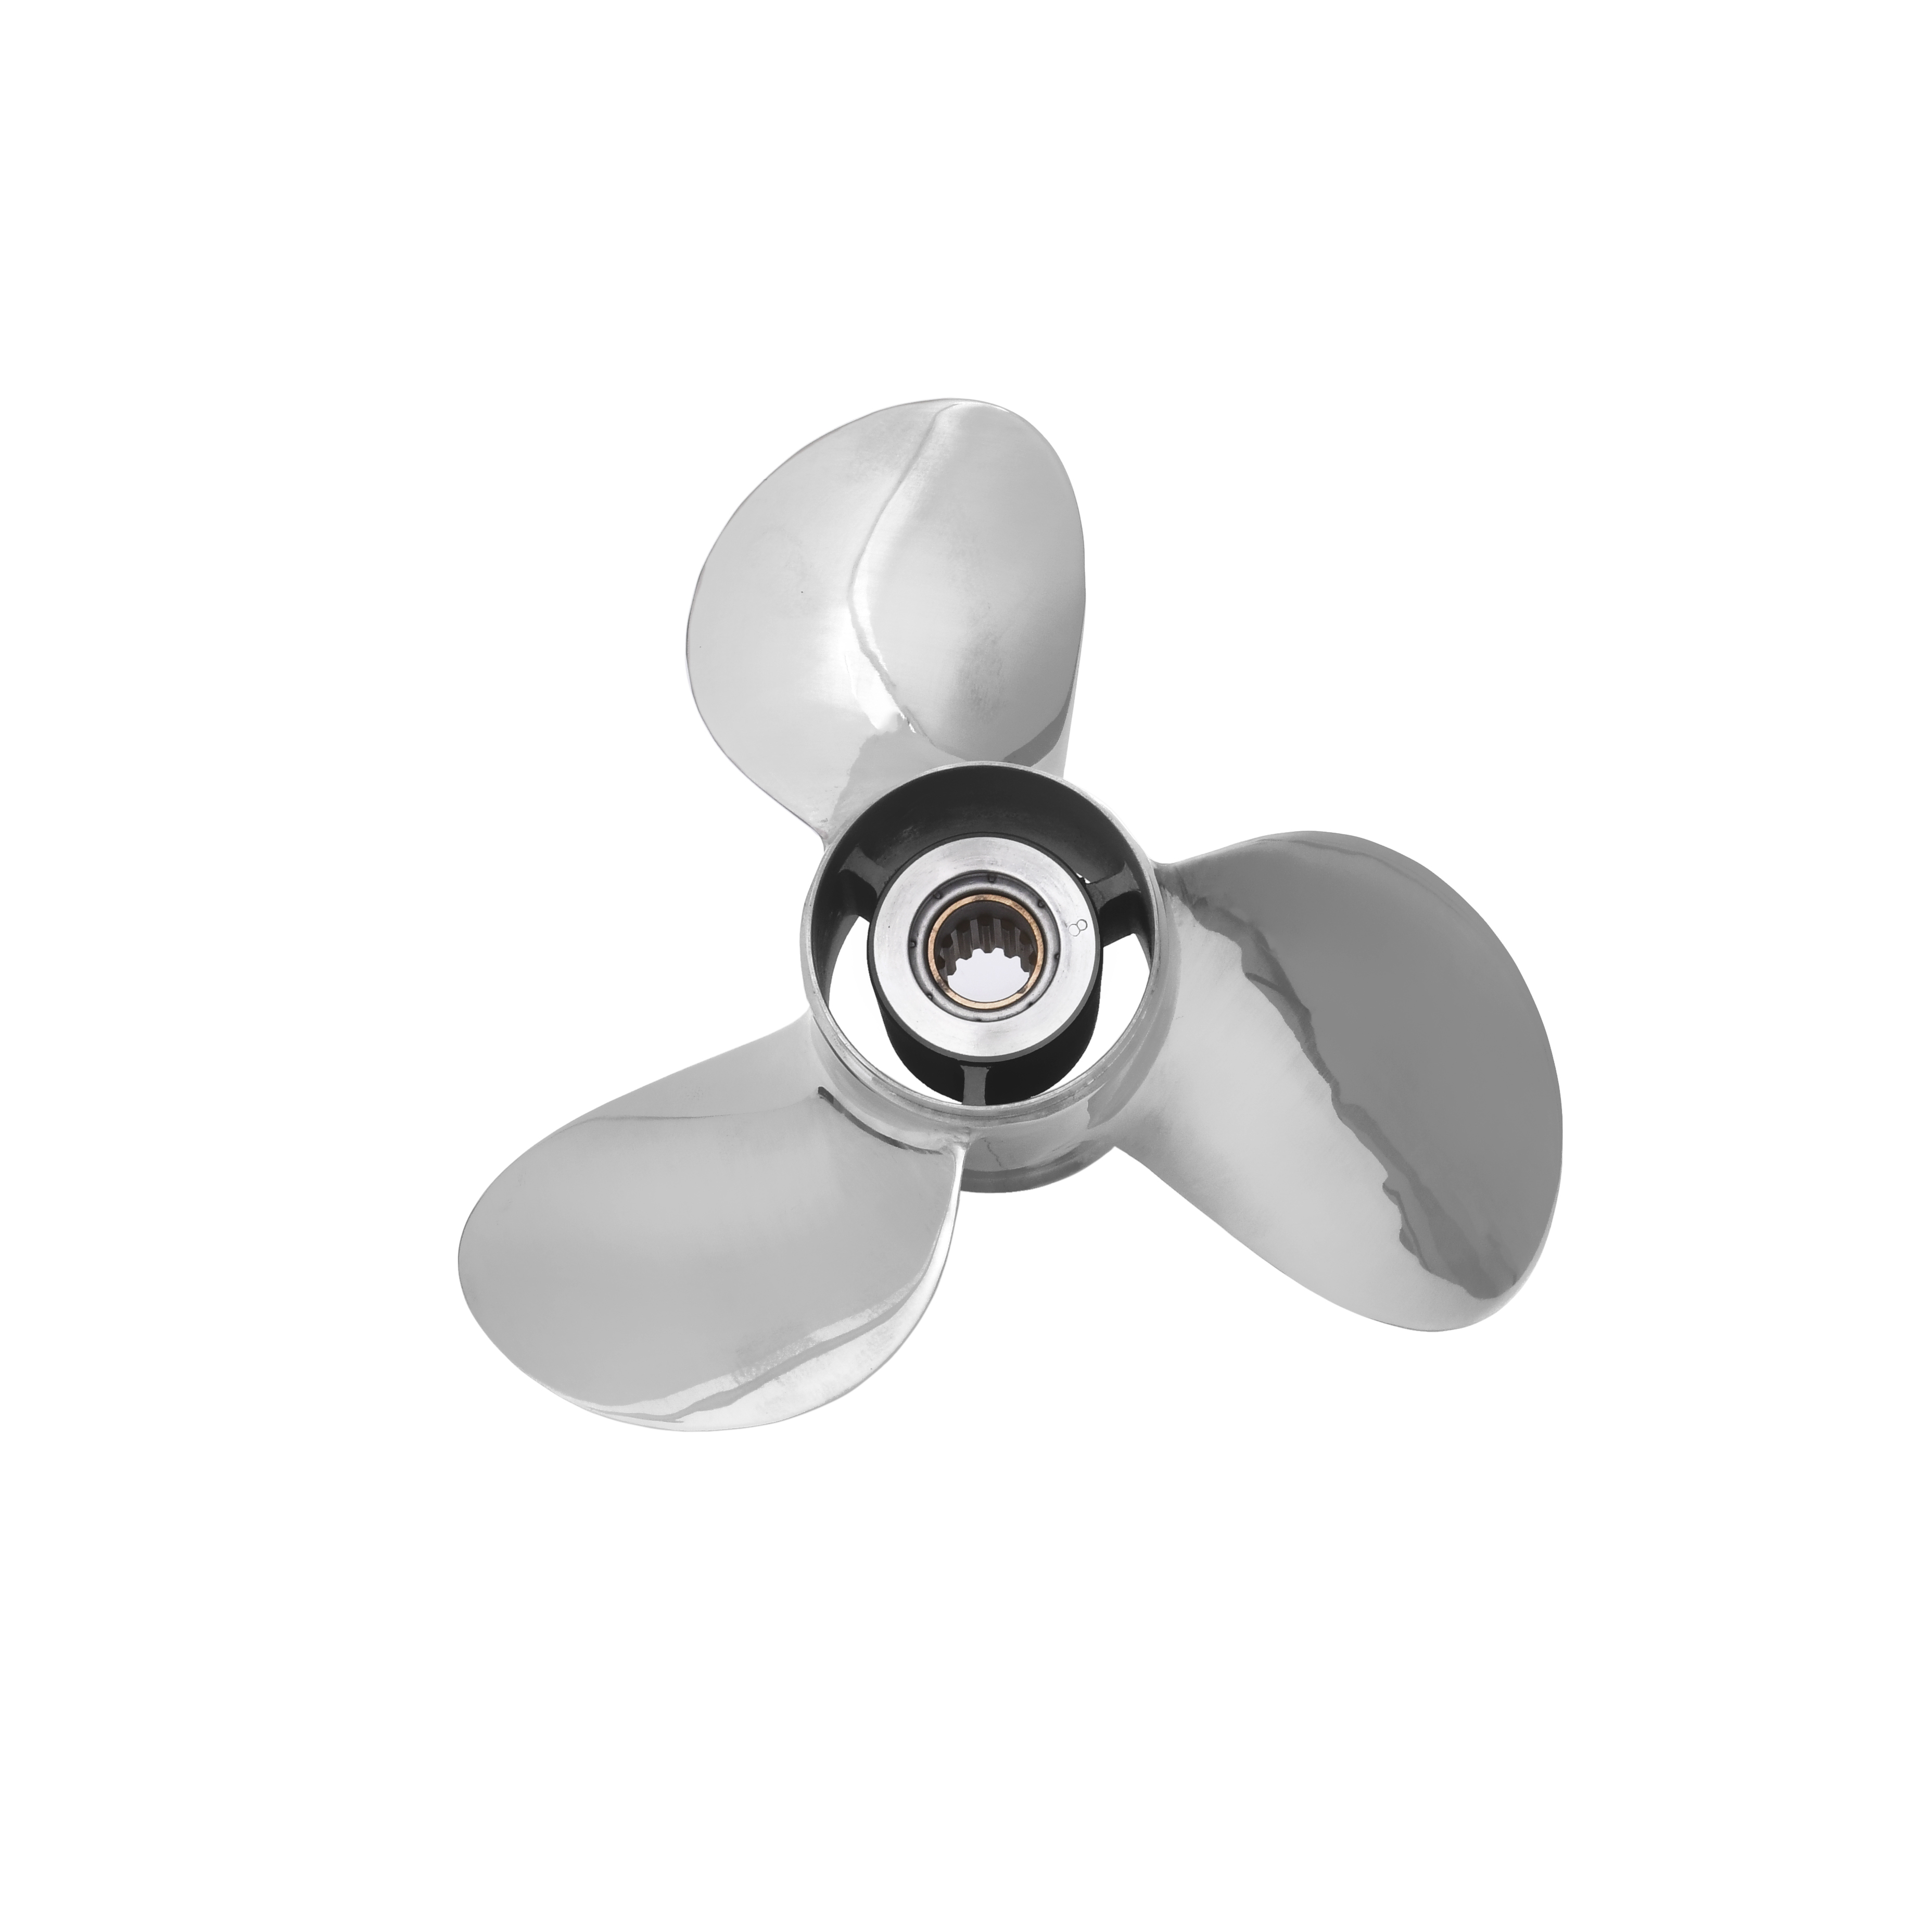 25-60HP Stainless Steel 11 1/4 X 14 Outboard Propeller for Yamaha 663-45930-00-98 13Tooth Spline RH